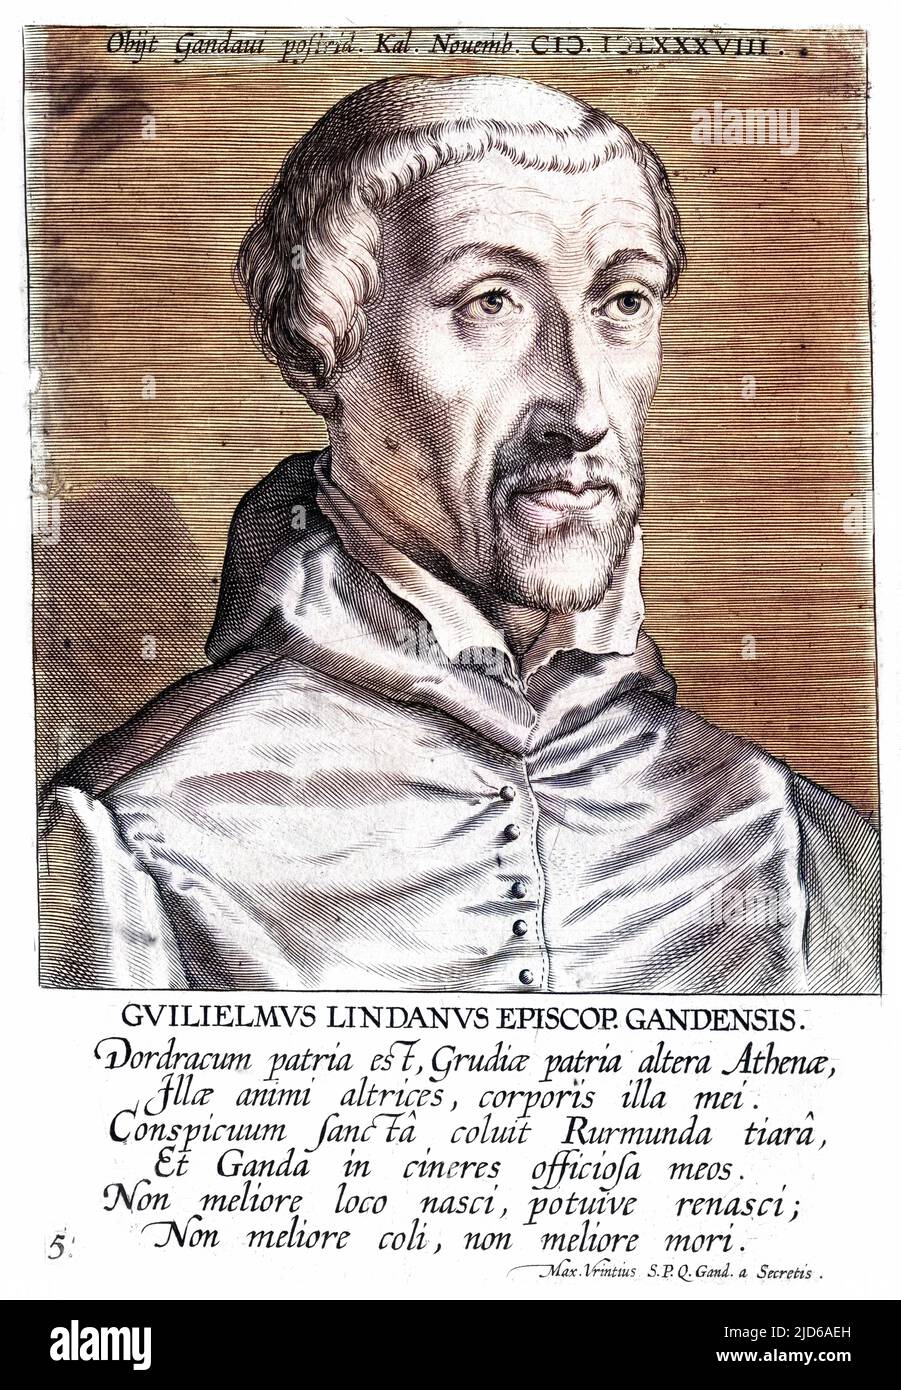 WILLEM LINDANUS Flemish churchman and theologian, bishop of Ghent. Colourised version of : 10163282       Date: 1528 - 1591 Stock Photo